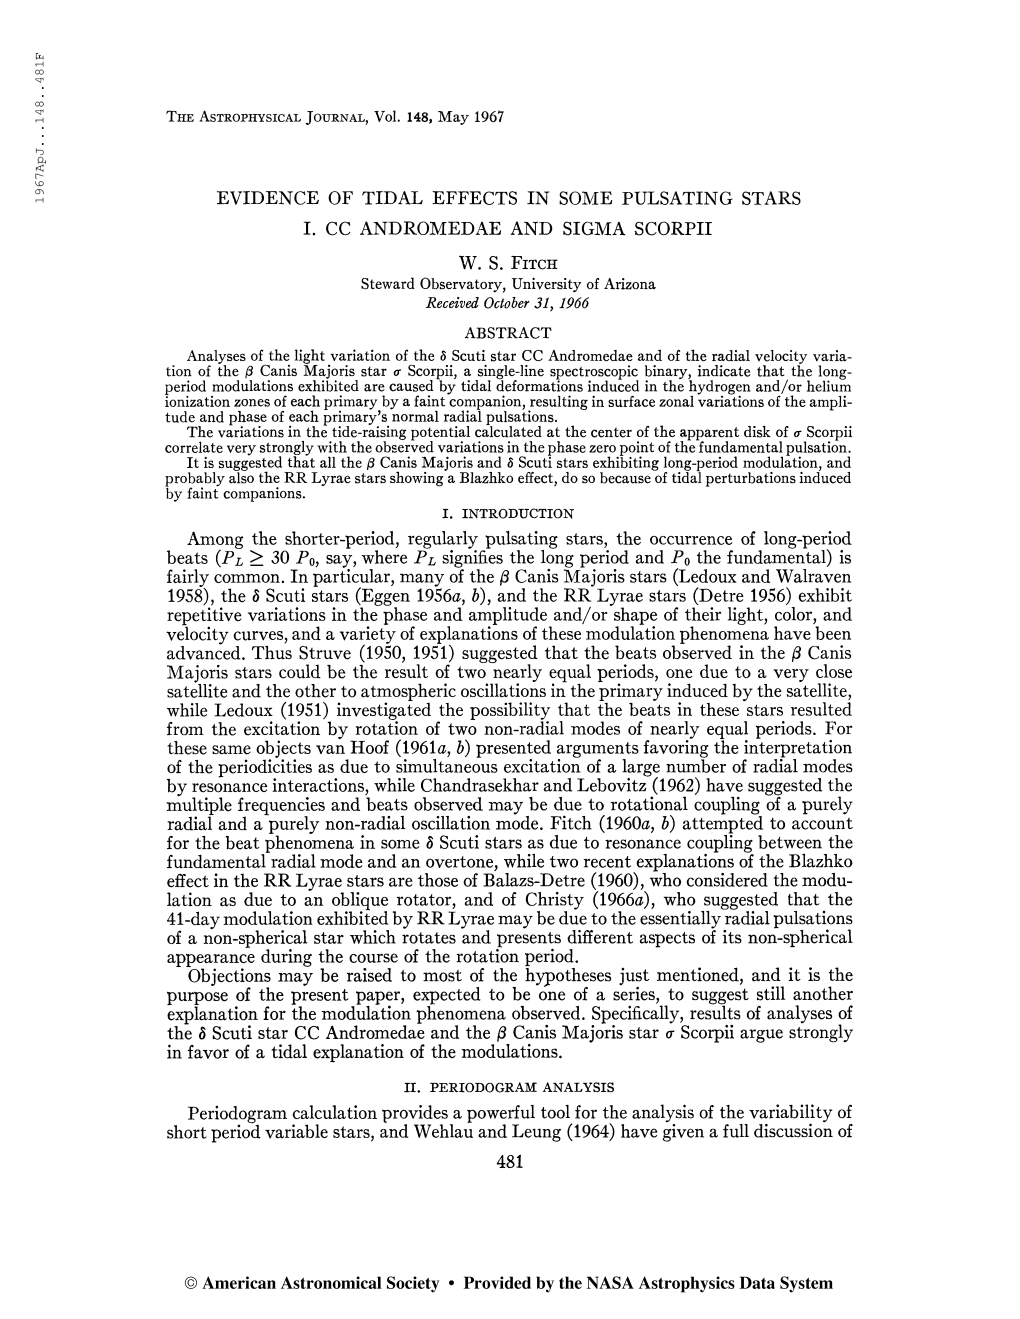 The Astrophysical Journal, Vol. 148, May 1967 EVIDENCE of TIDAL EFFECTS in SOME PULSATING STARS I. CC ANDROMEDAE and SIGMA SCORP